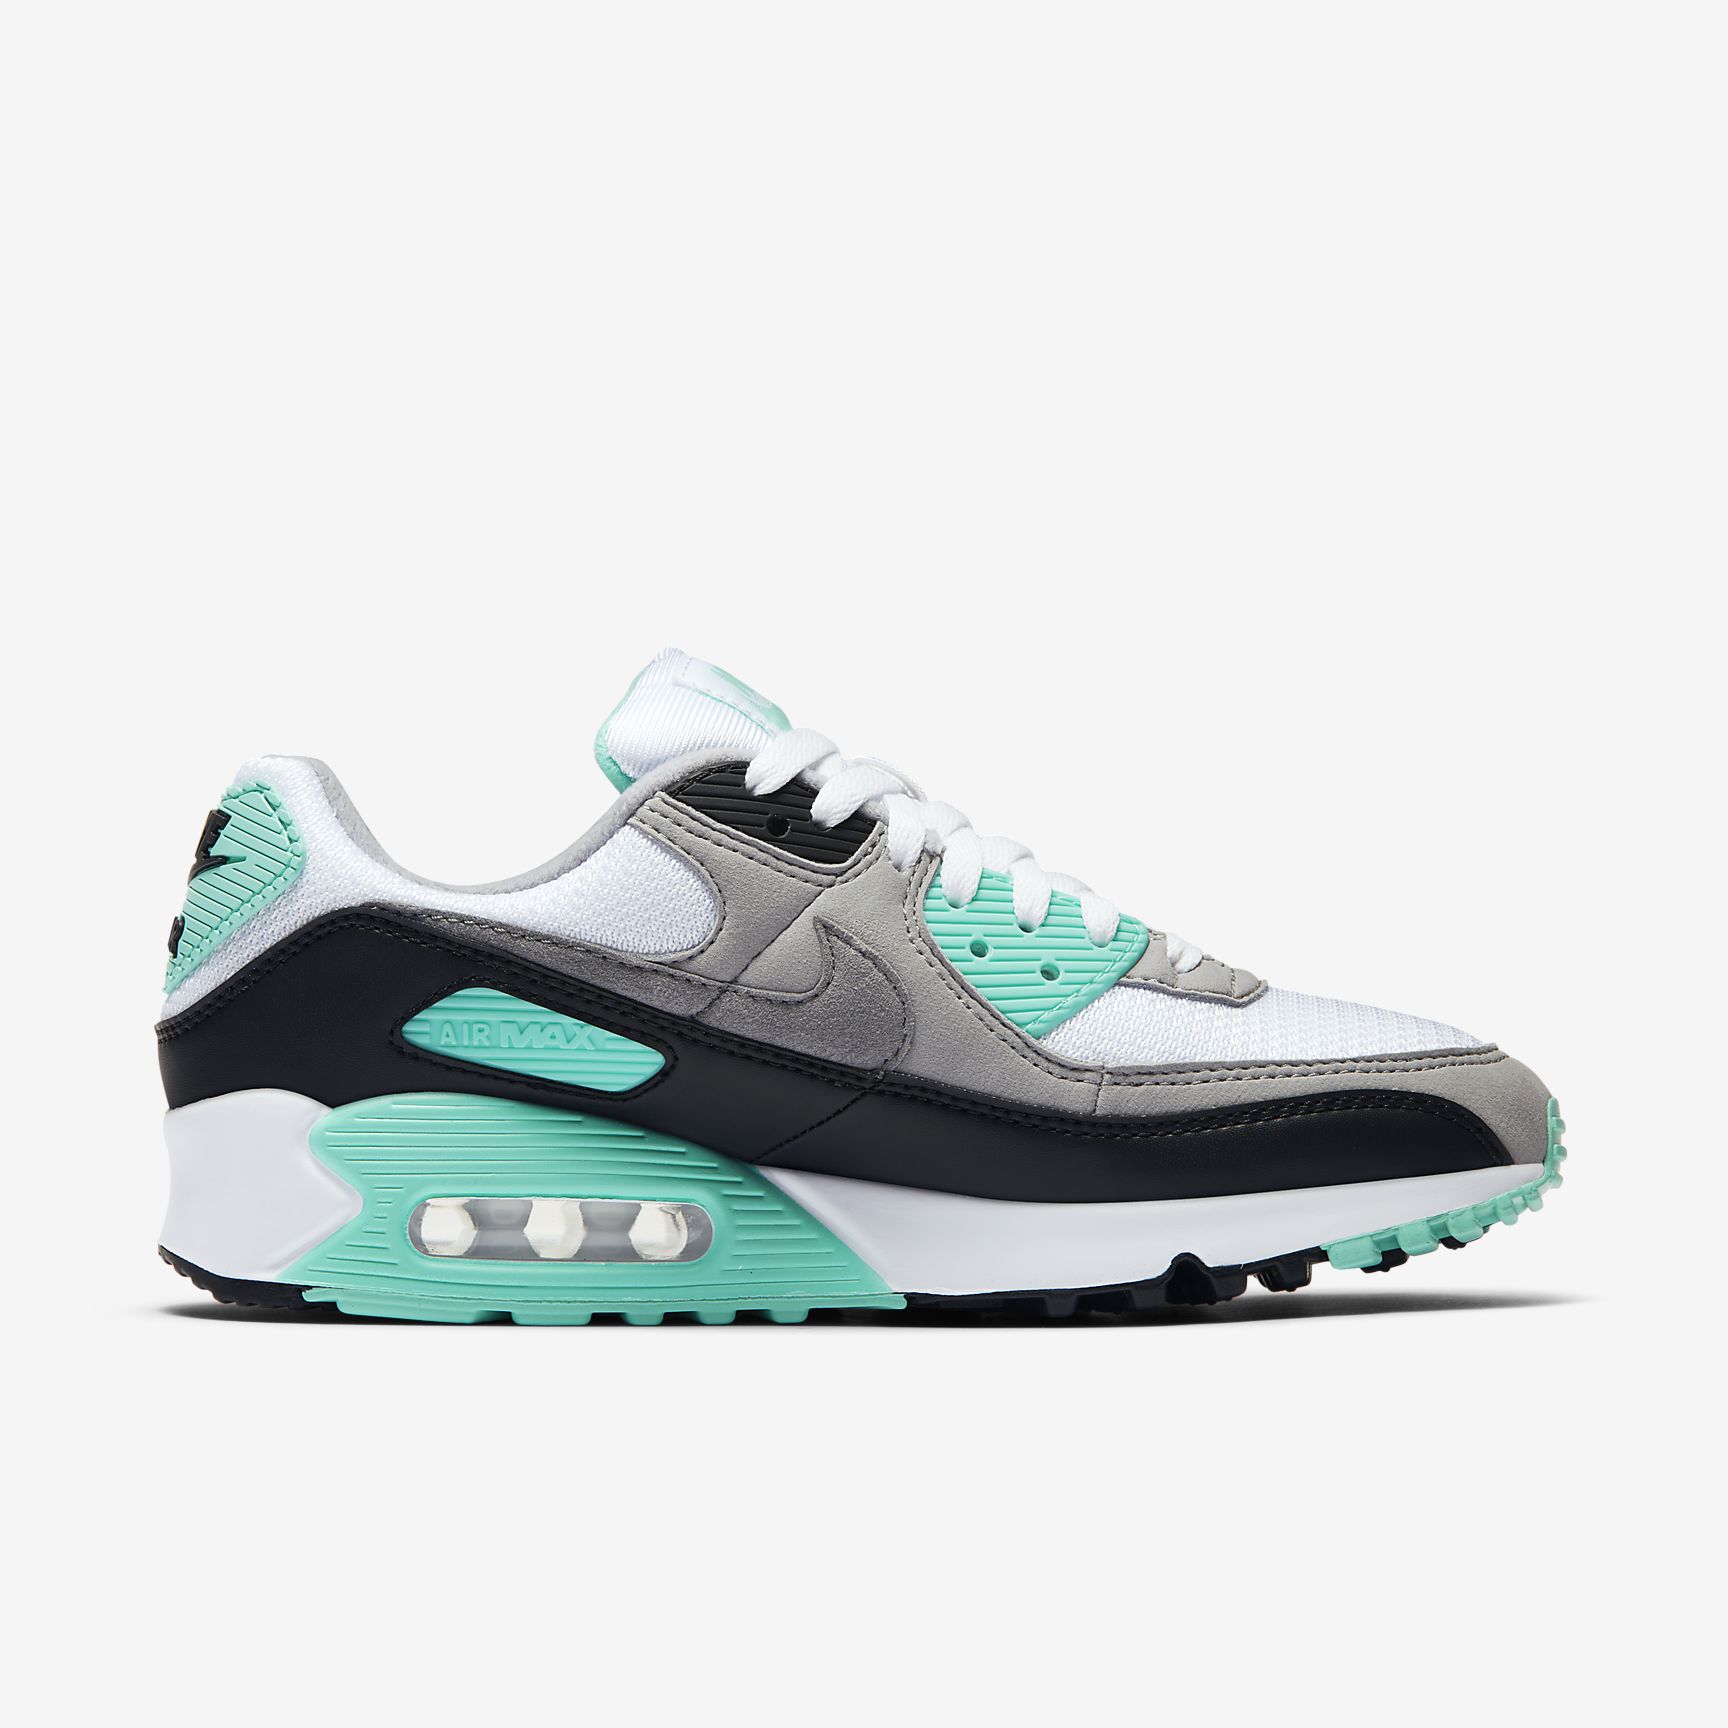 Women's Air Max 90 (White / Particle Grey Hyper Turquoise)(CD04 Trilogy Merch